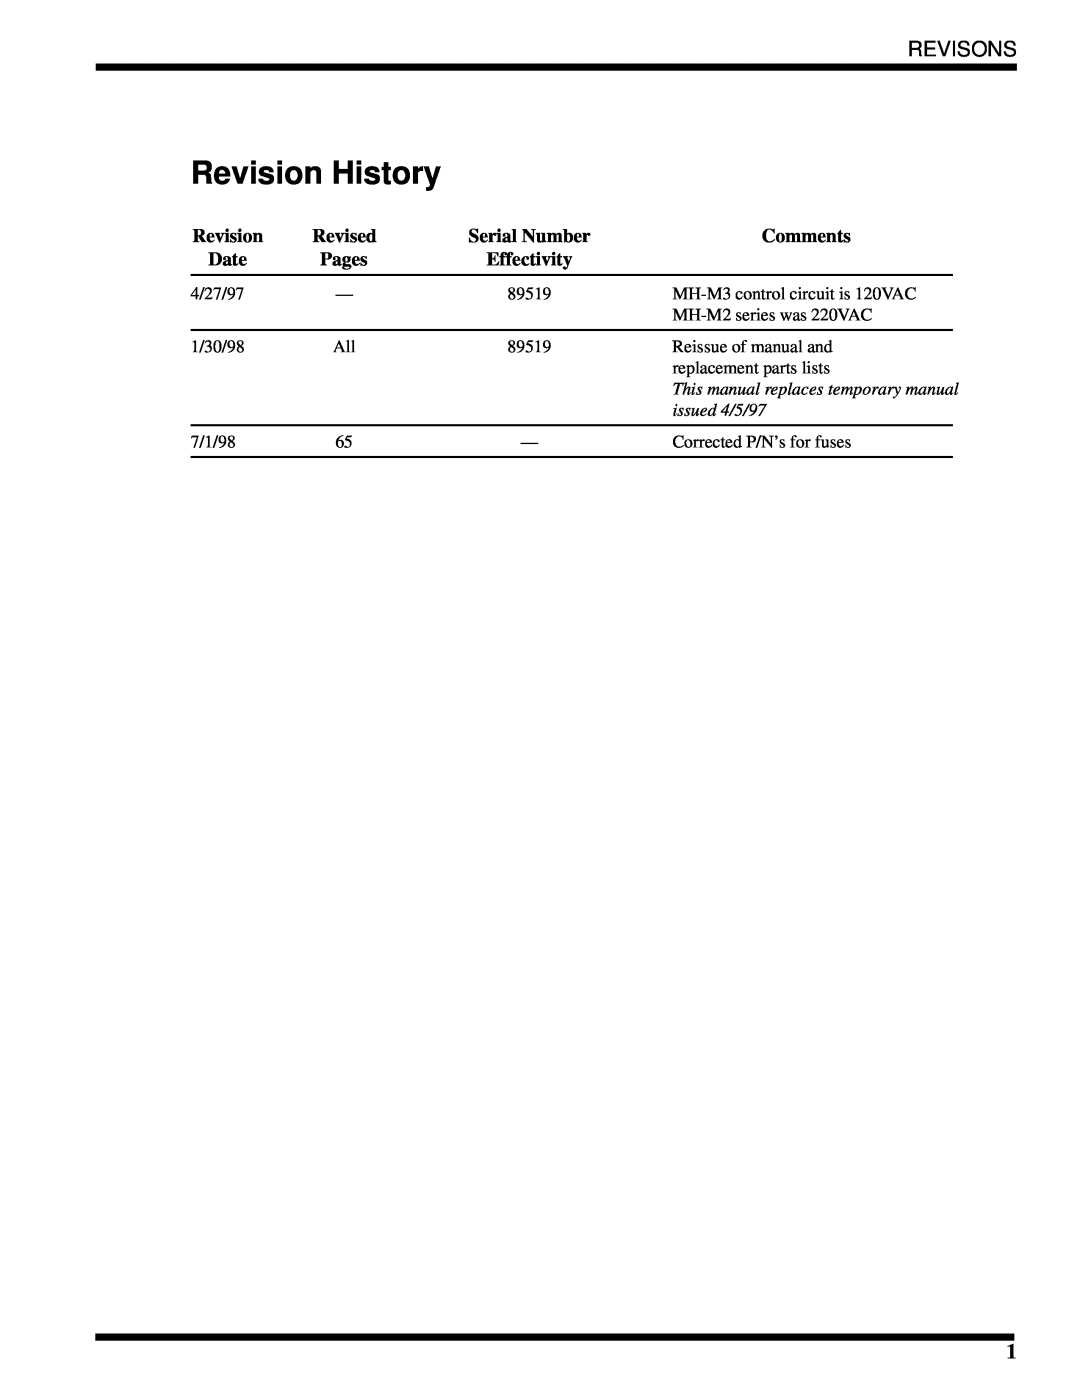 Moyer Diebel MH-6NM3, MH-6LM3, MH-60M3 technical manual Revision History, Revisons, Comments, issued 4/5/97 